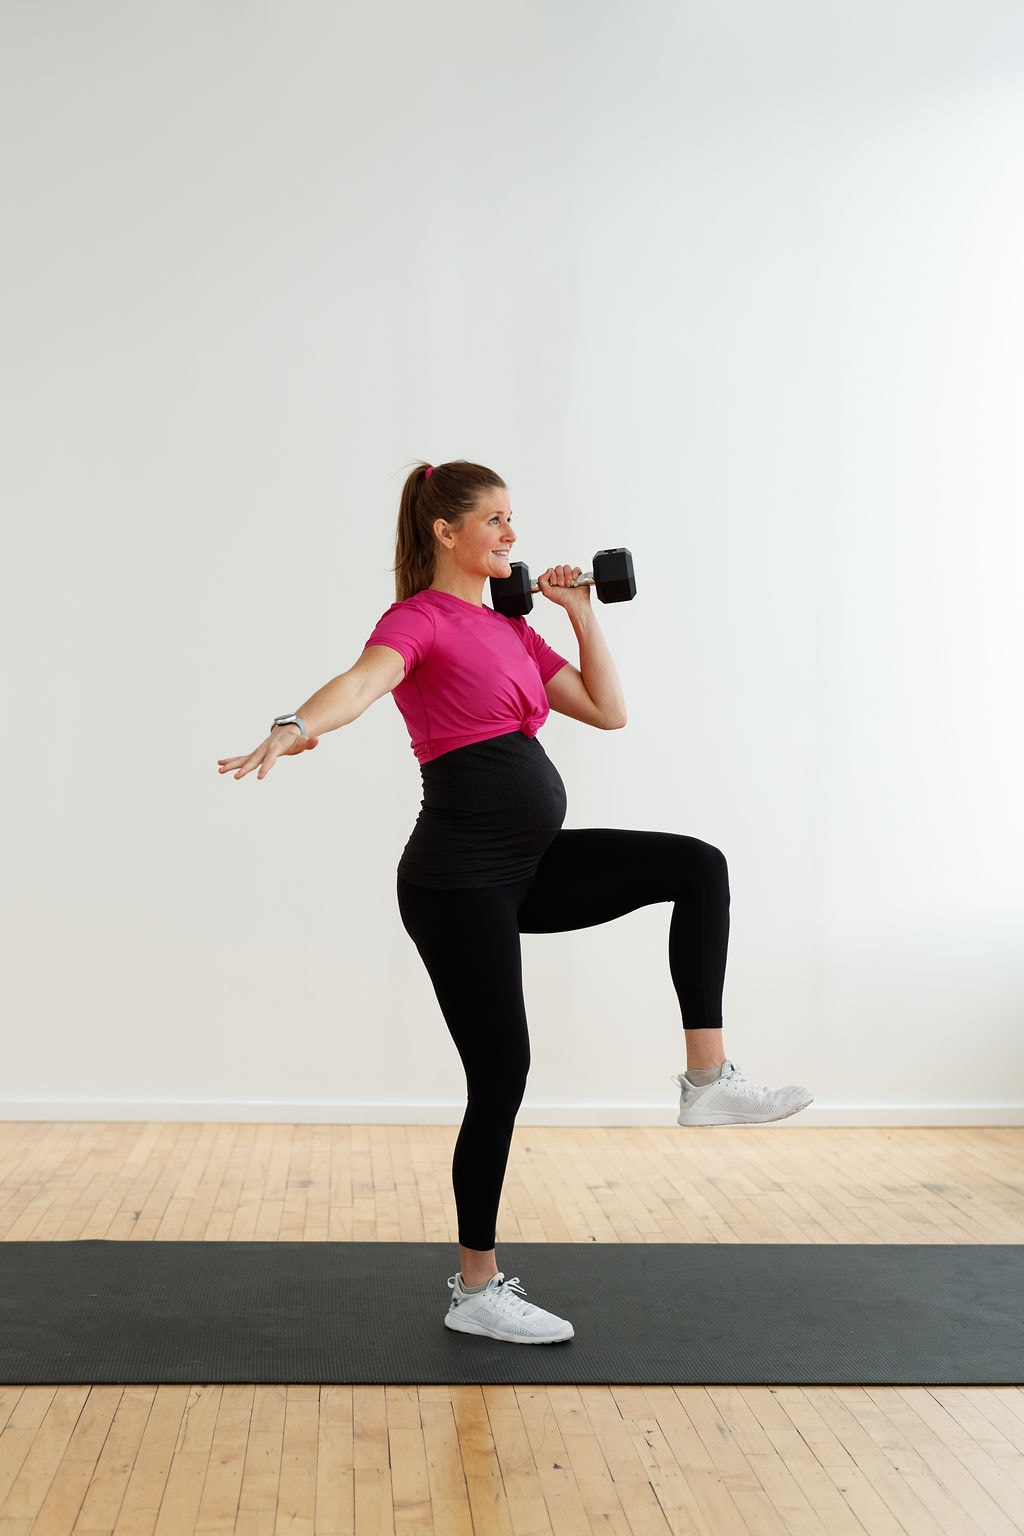 Yes, You Can Work Your Abs While Standing. Here's How! - Nourish, Move, Love